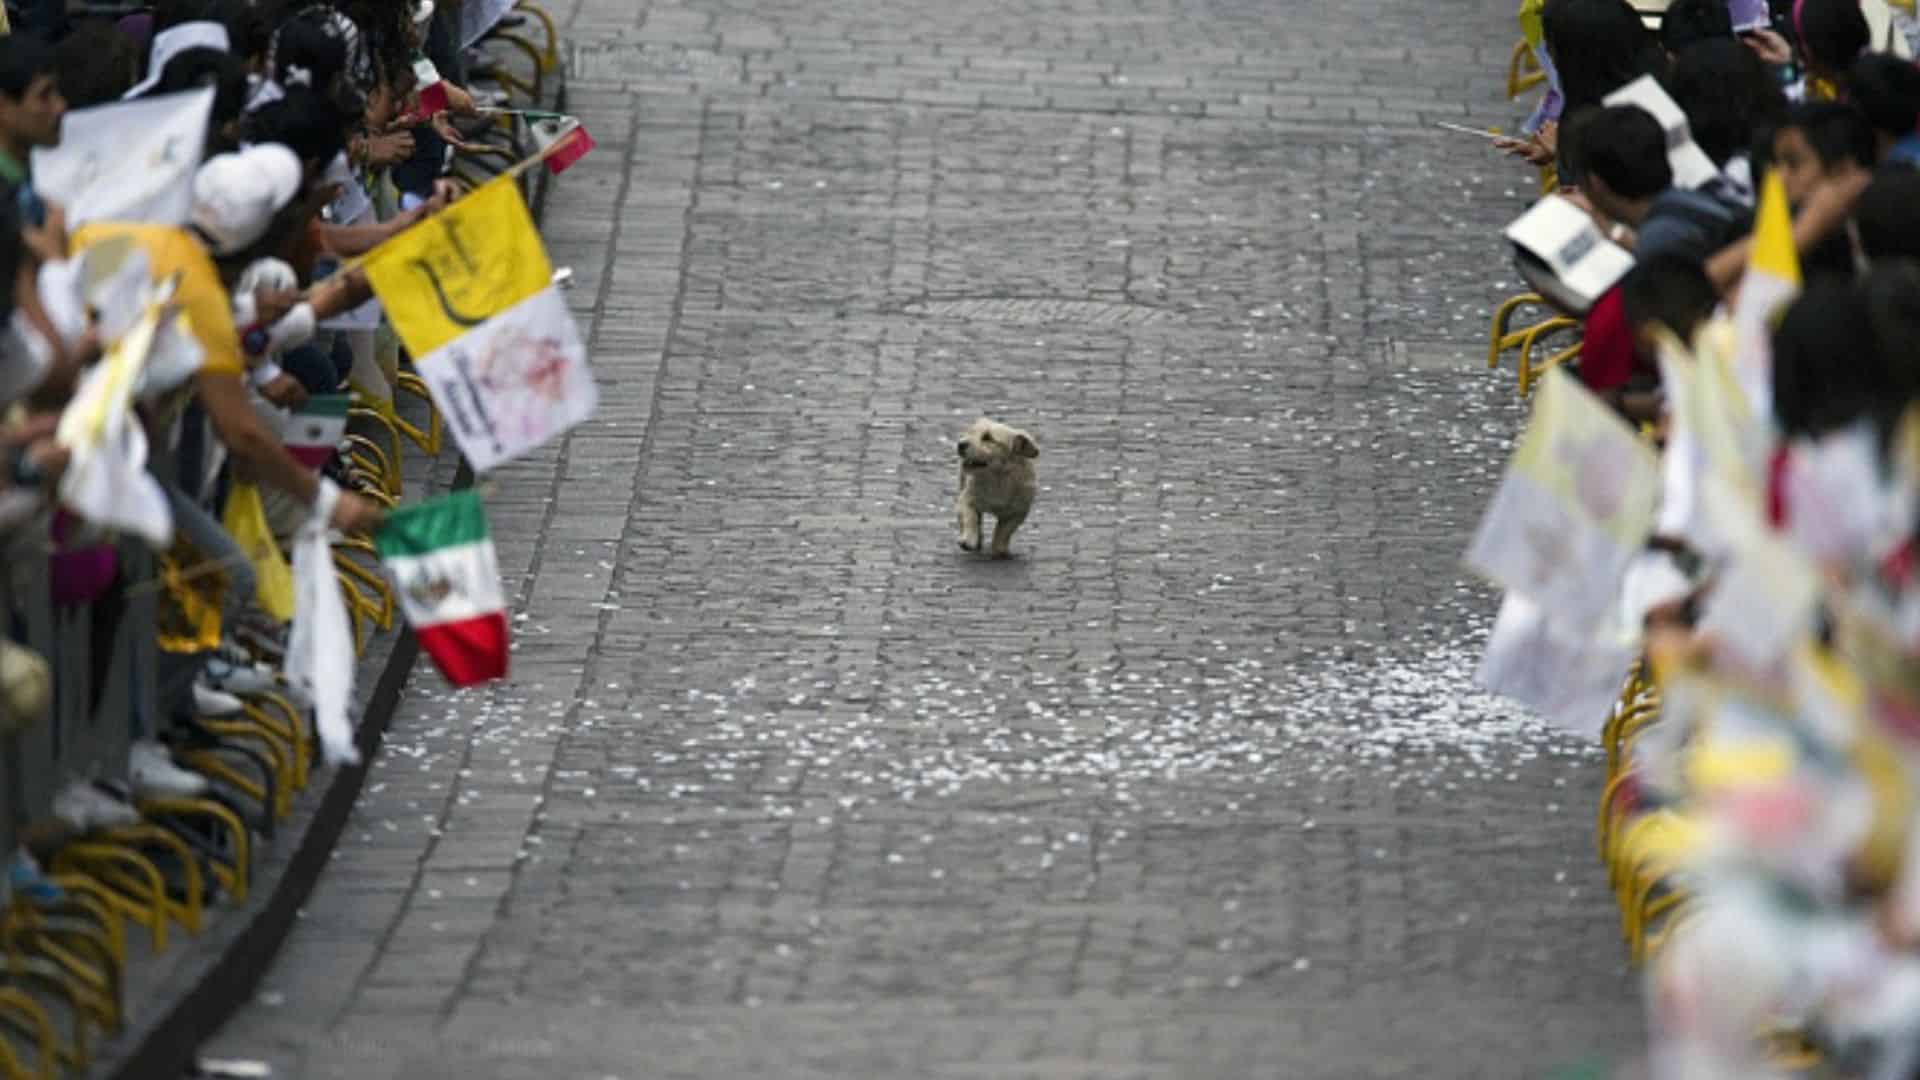 Cute Dog Enthusiastically Steals The Parade And Pupstages The Pope 